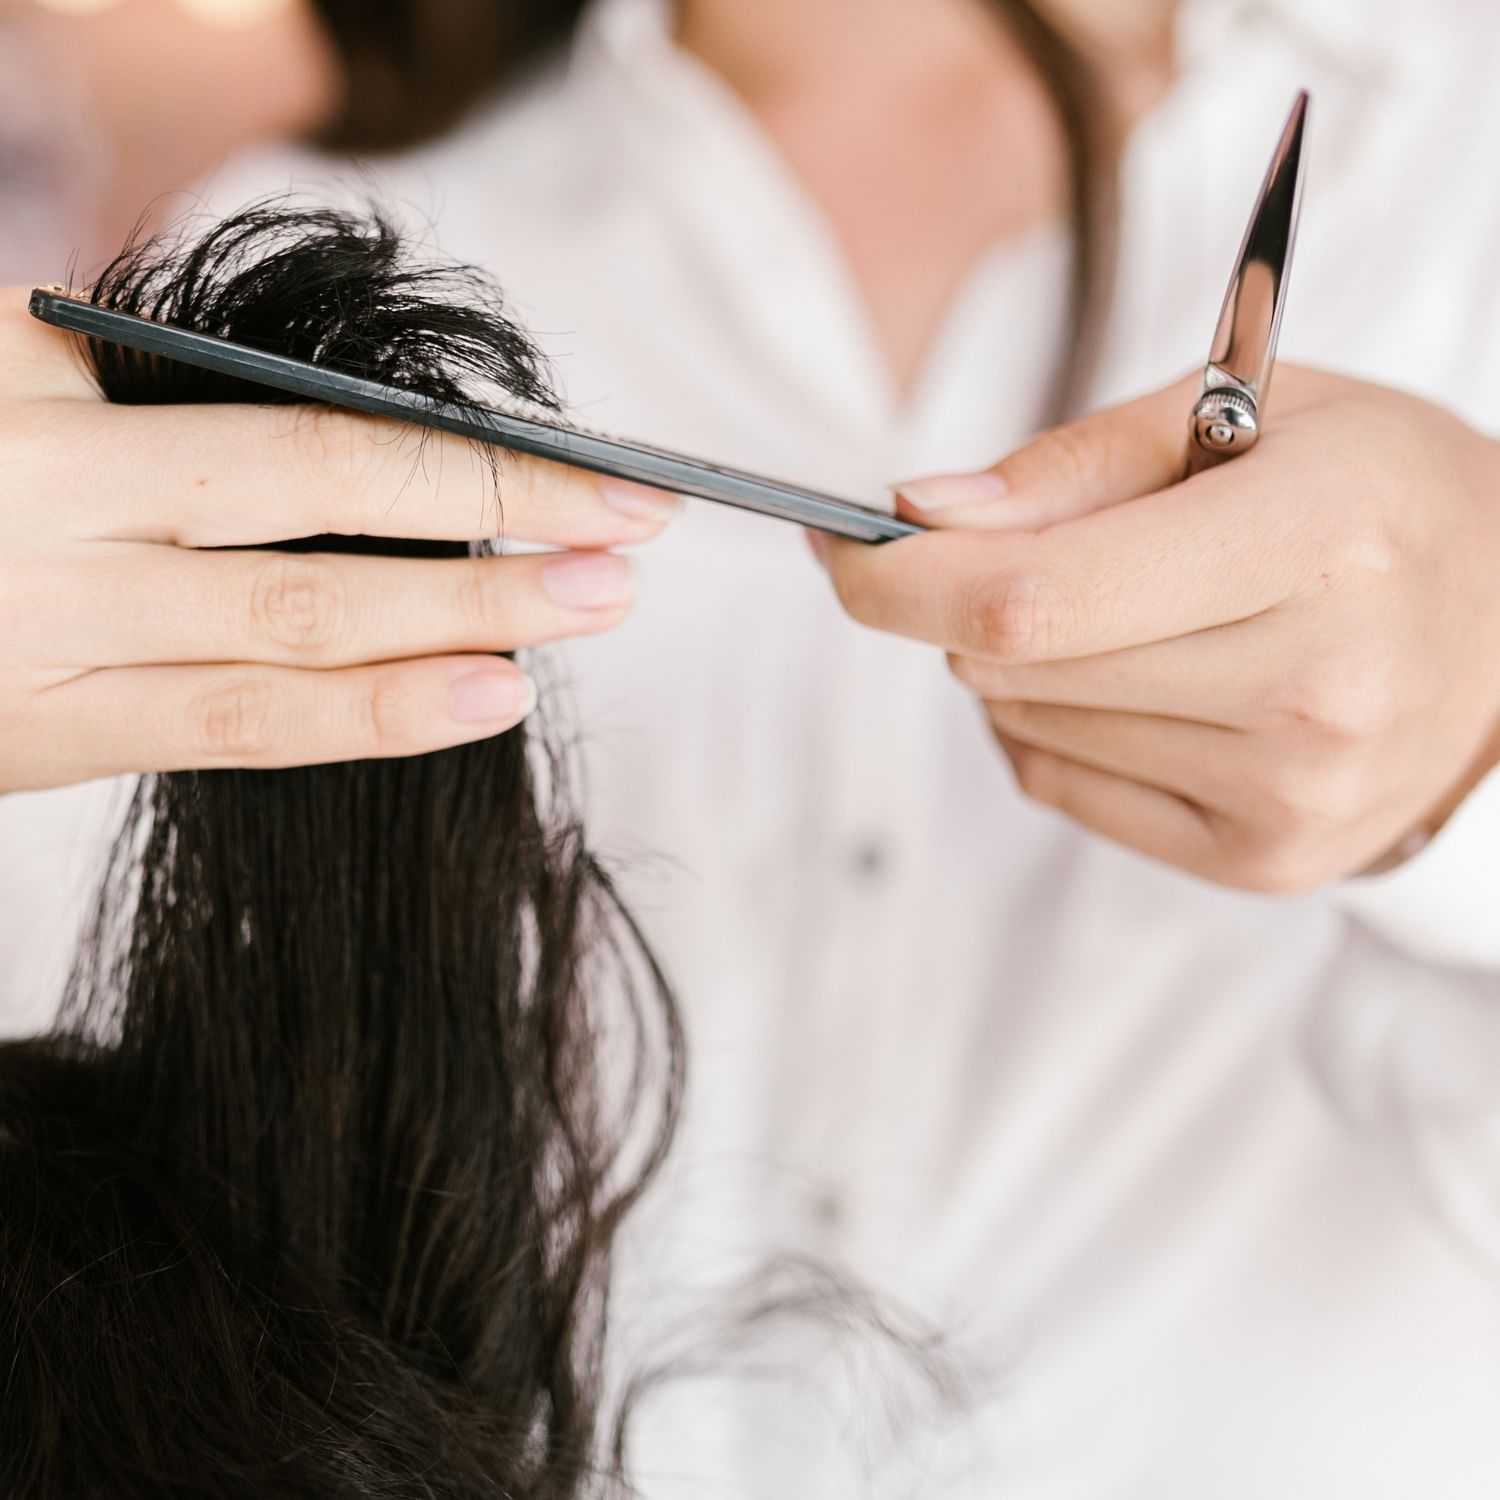 A stylist holds a section of hair above a client's head with a comb, ready to make a cut.